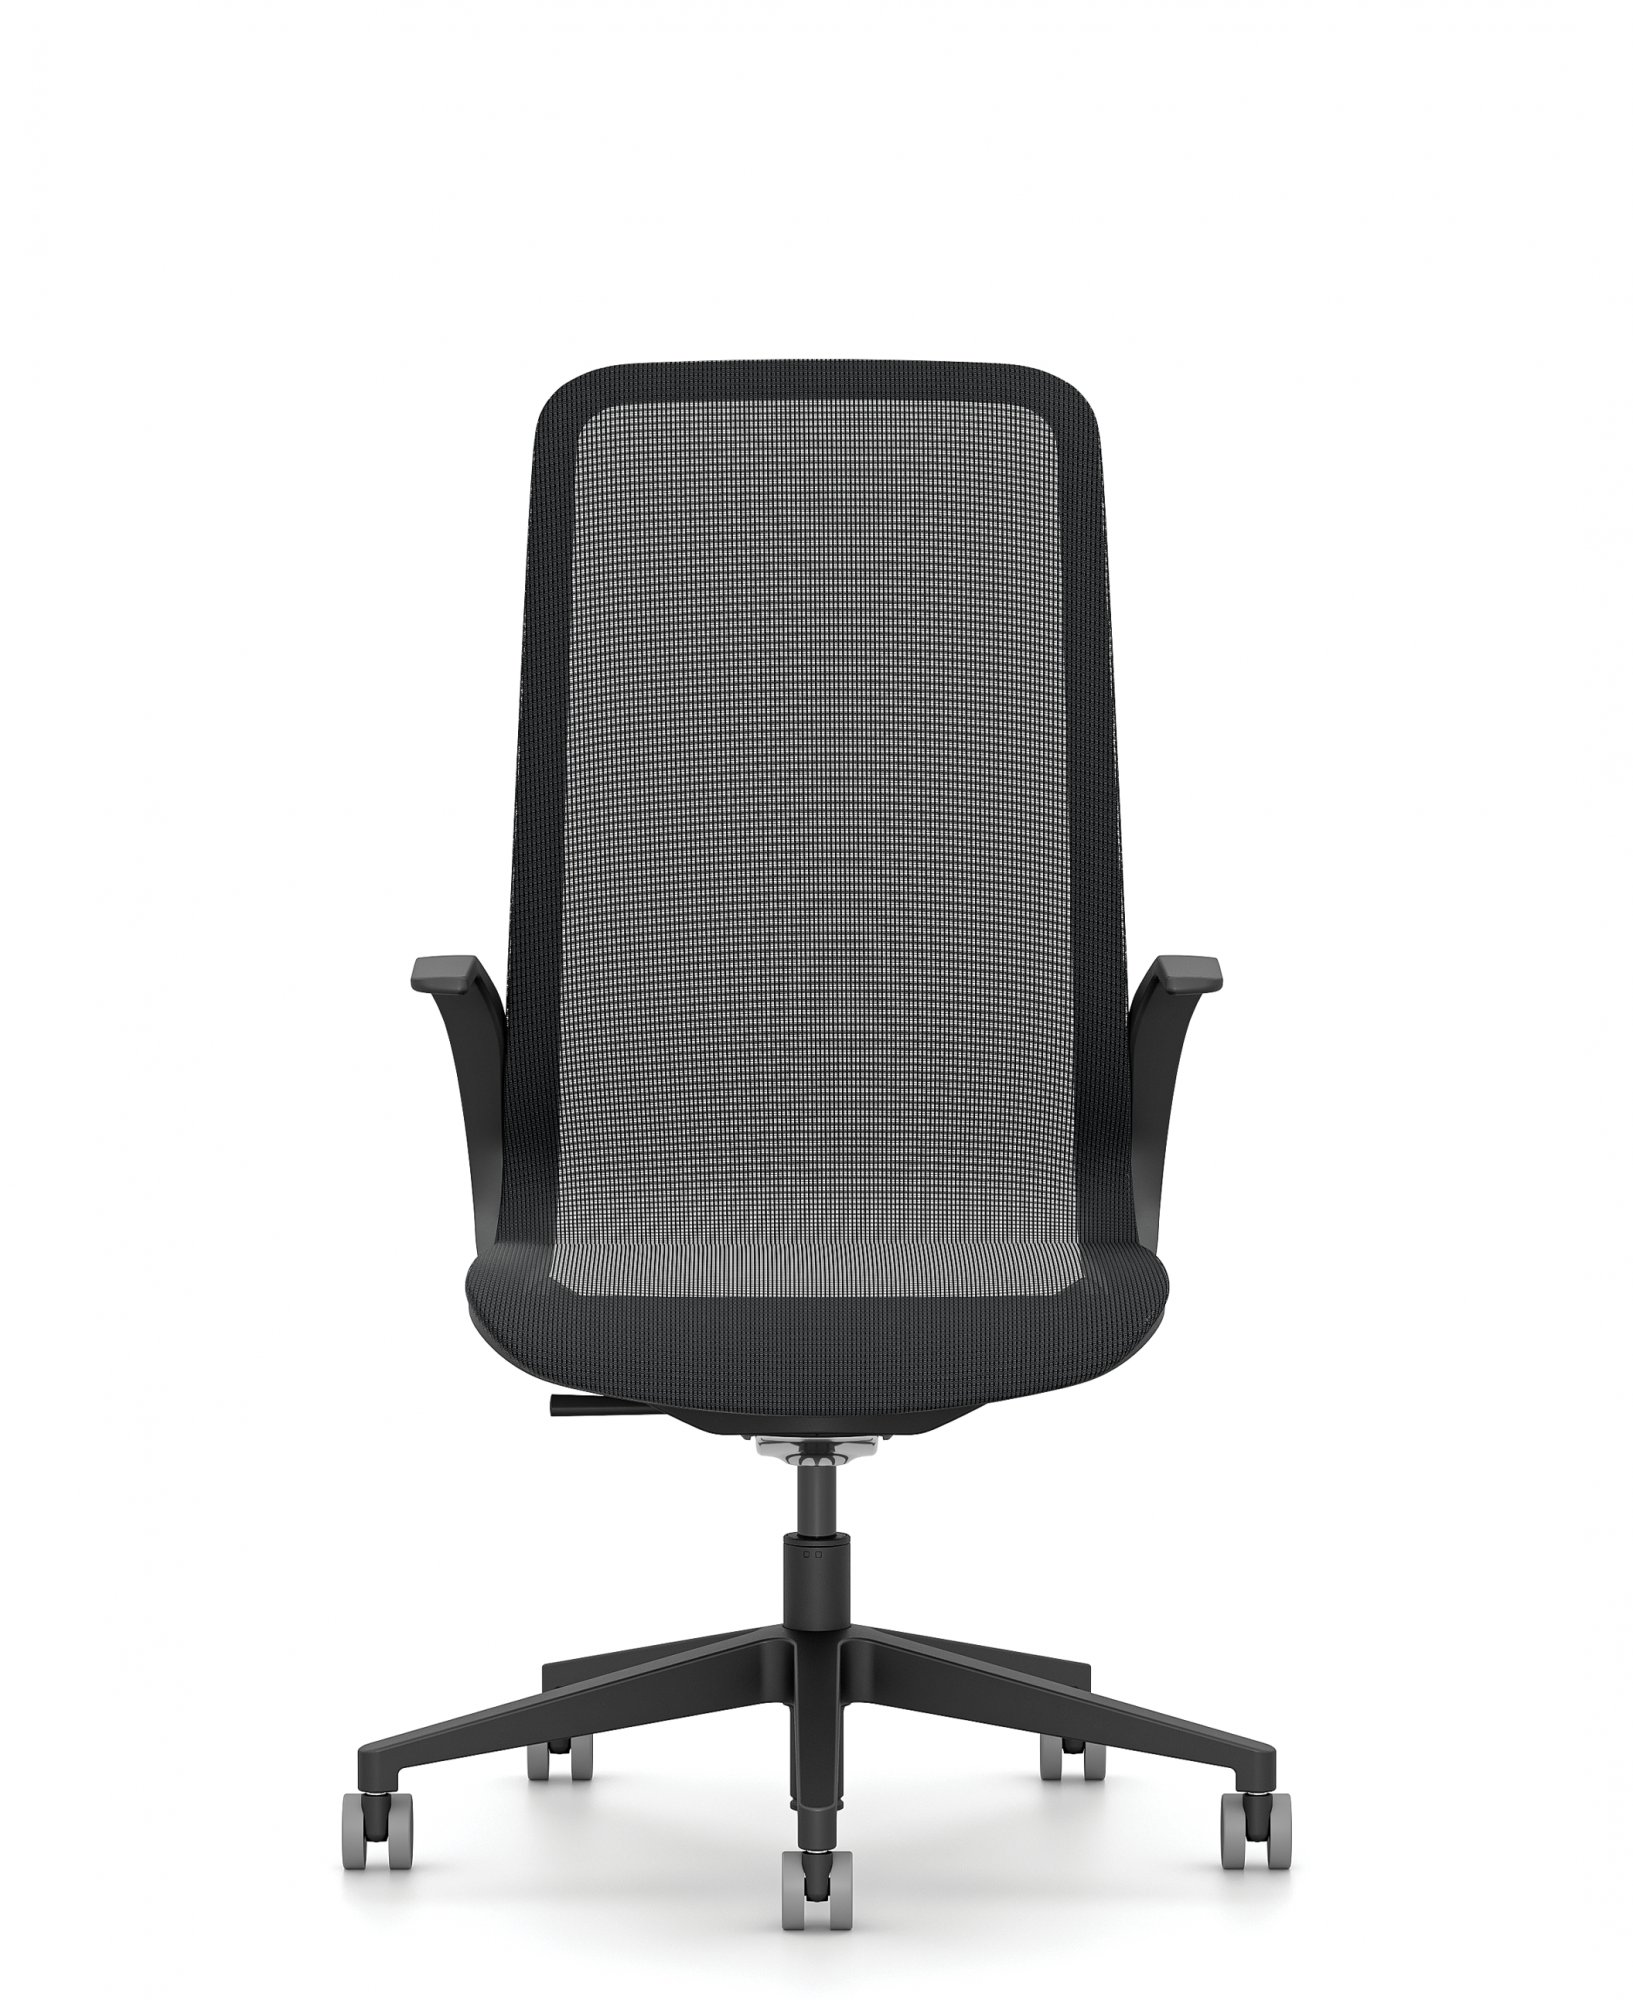 Office Master LN5 (OM Seating) Lorien High-Back Mesh Chair